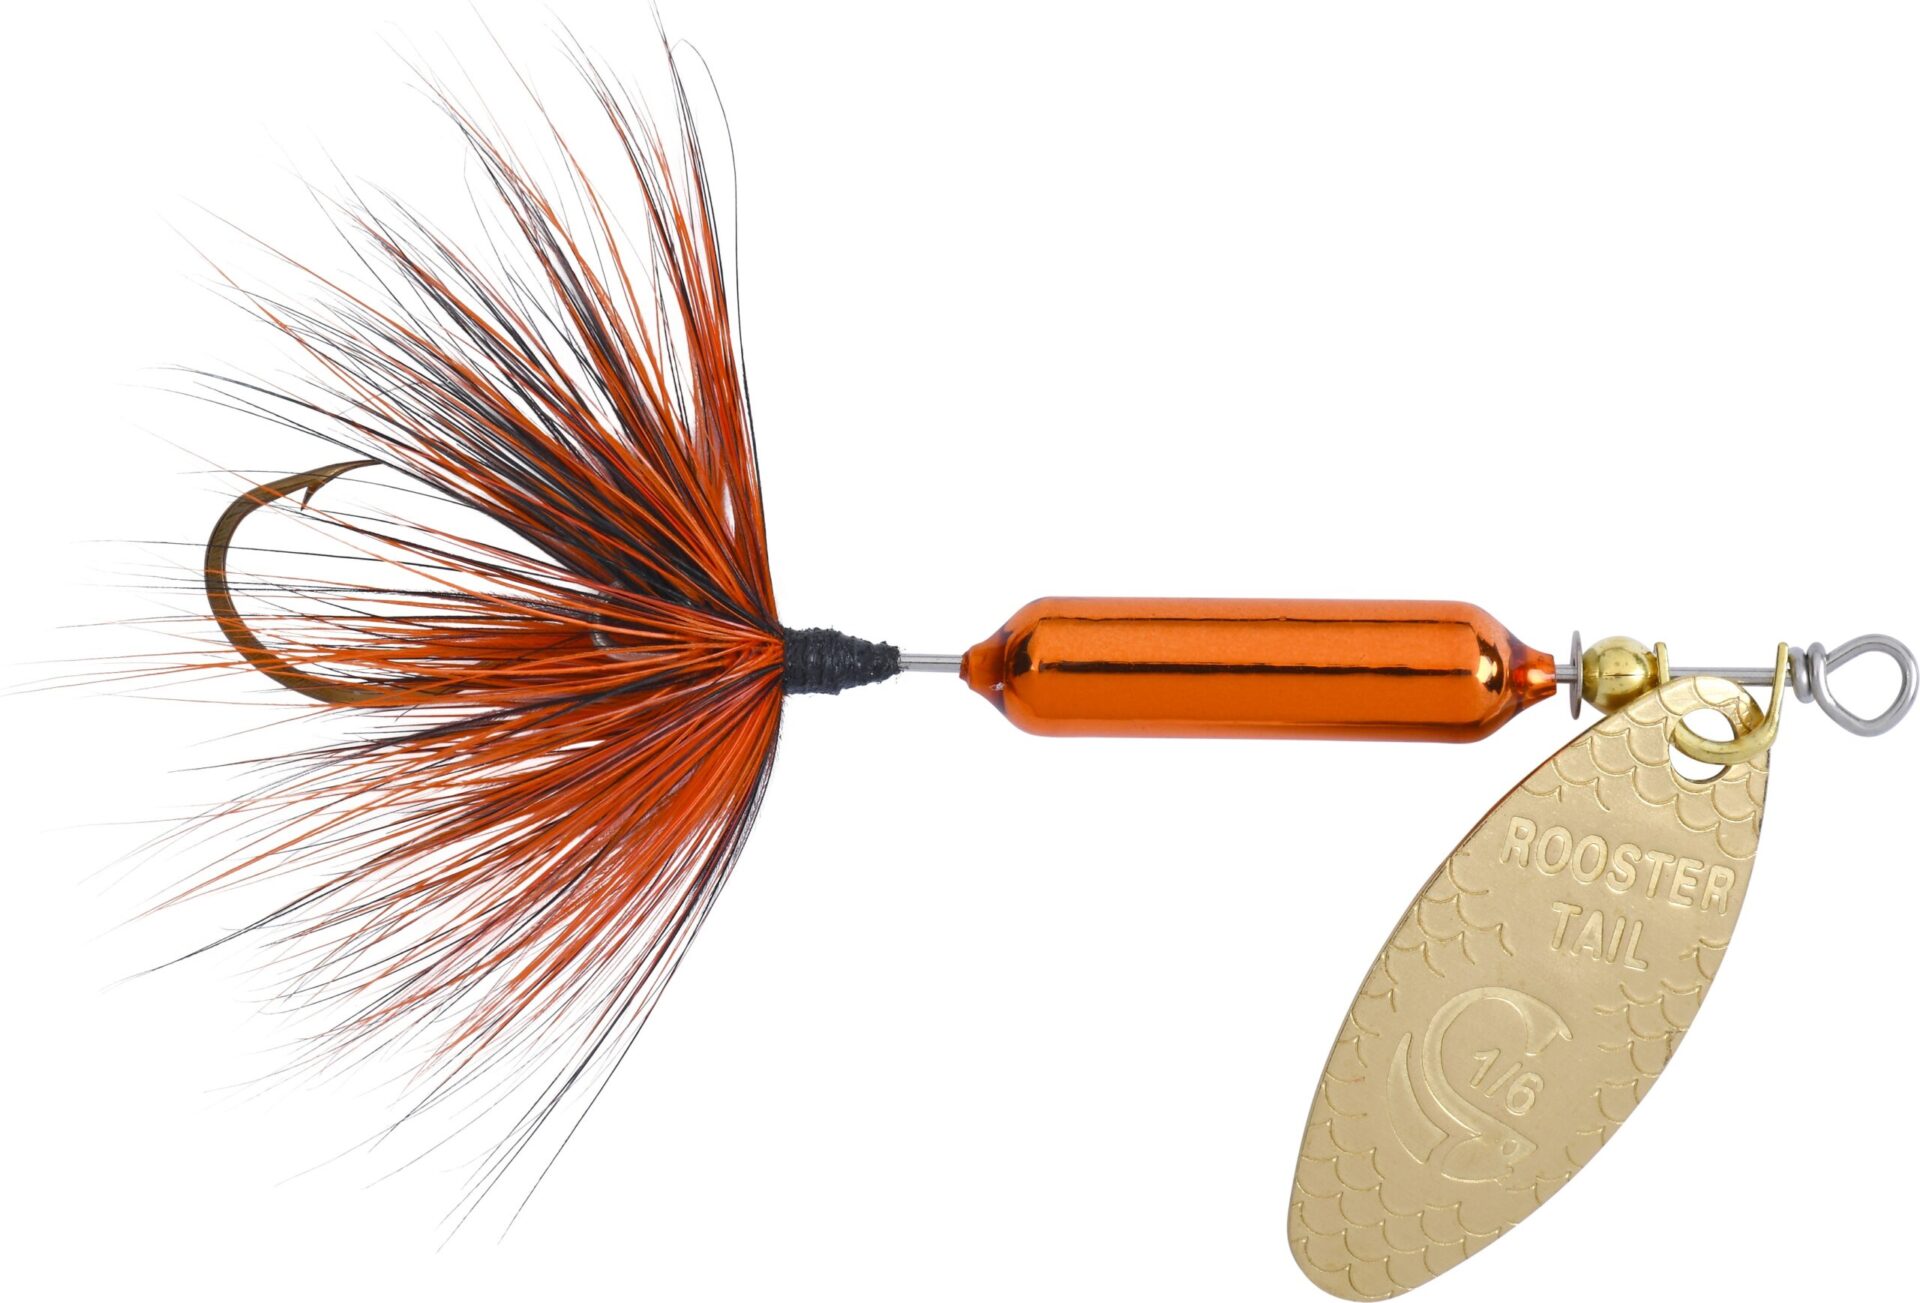 Original Rooster Tail®: 1/24 oz. - Single, rooster tail fishing